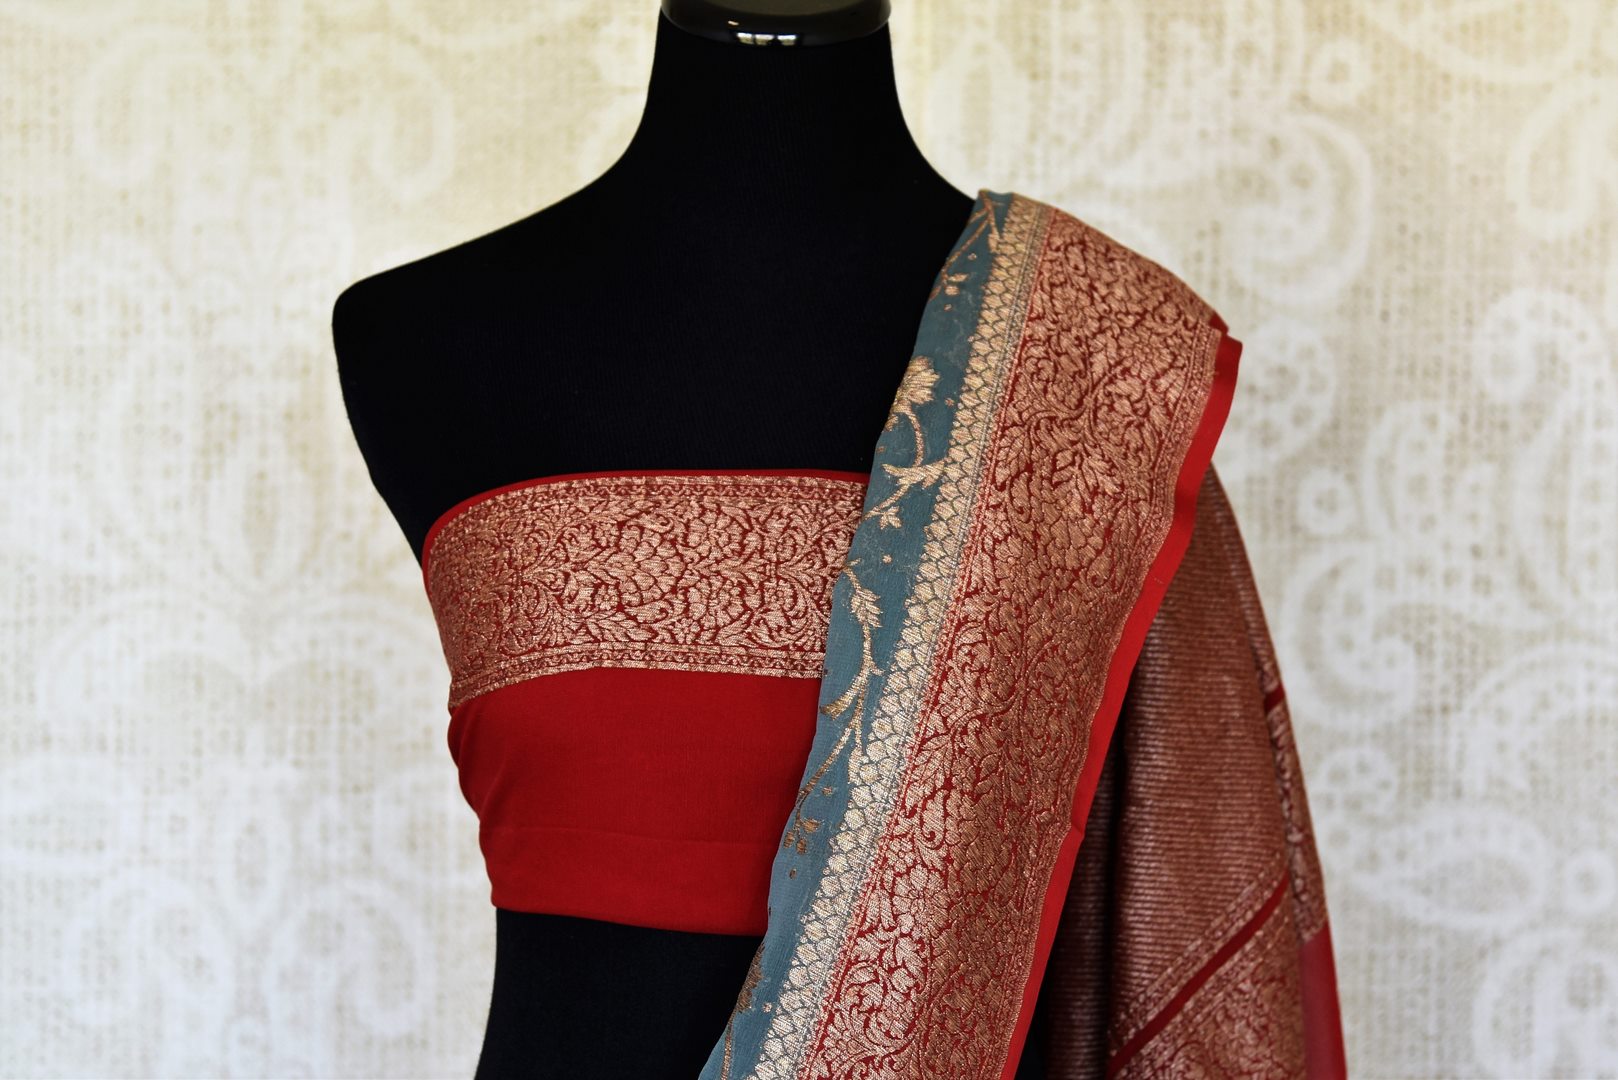 Buy blue georgette Banarasi sari online in USA with red zari border. Feel traditional on special occasions in beautiful Indian designer saris from Pure Elegance Indian fashion store in USA. Choose from a splendid variety of Banarasi sarees, pure handwoven saris. Buy online.-blouse pallu